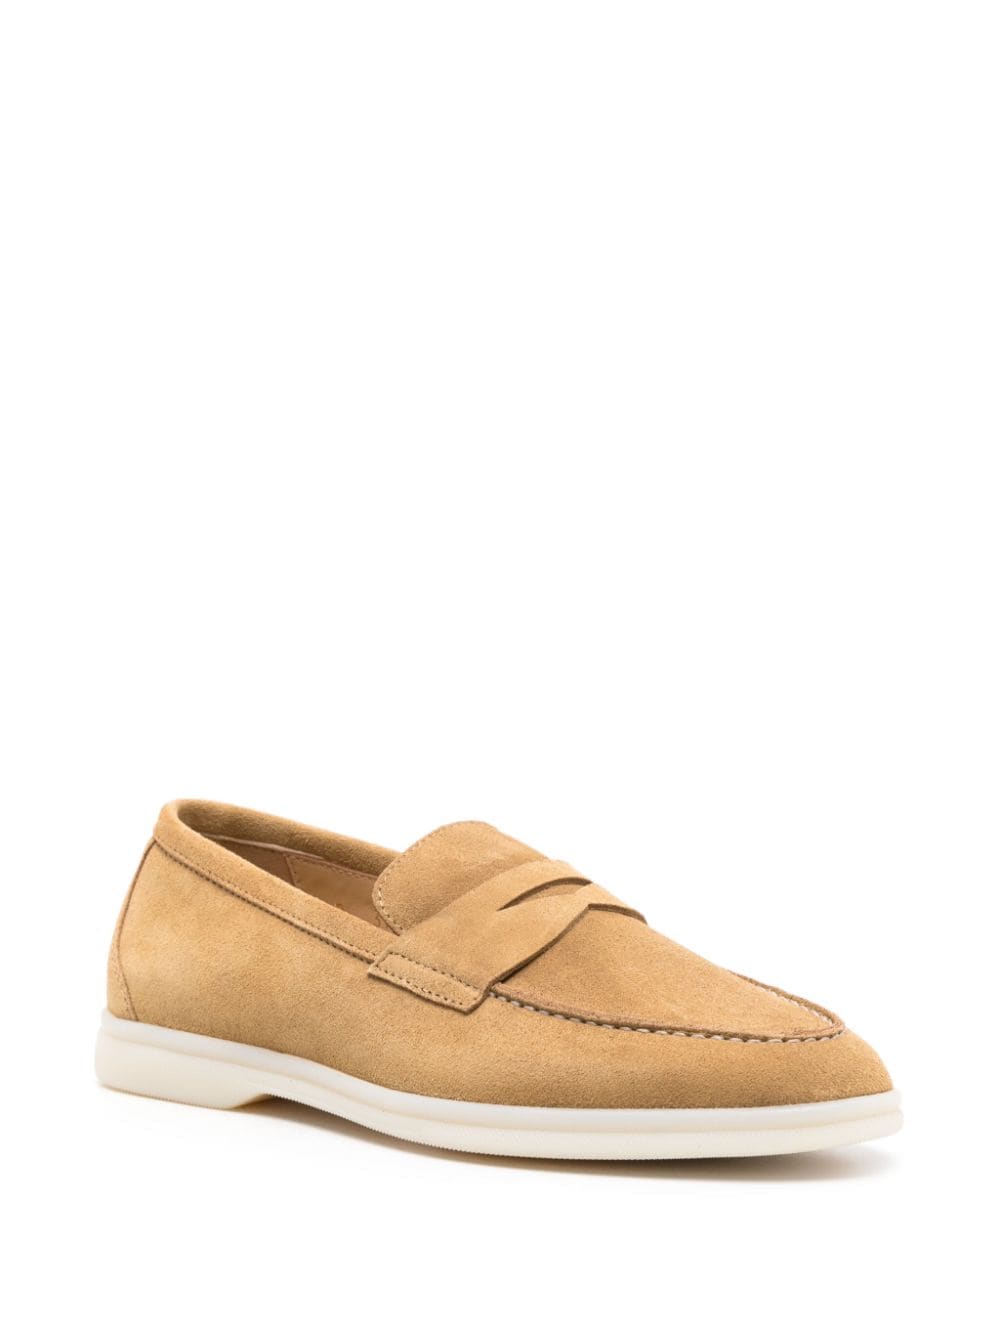 Scarosso Luciana suede penny loafers - Beige